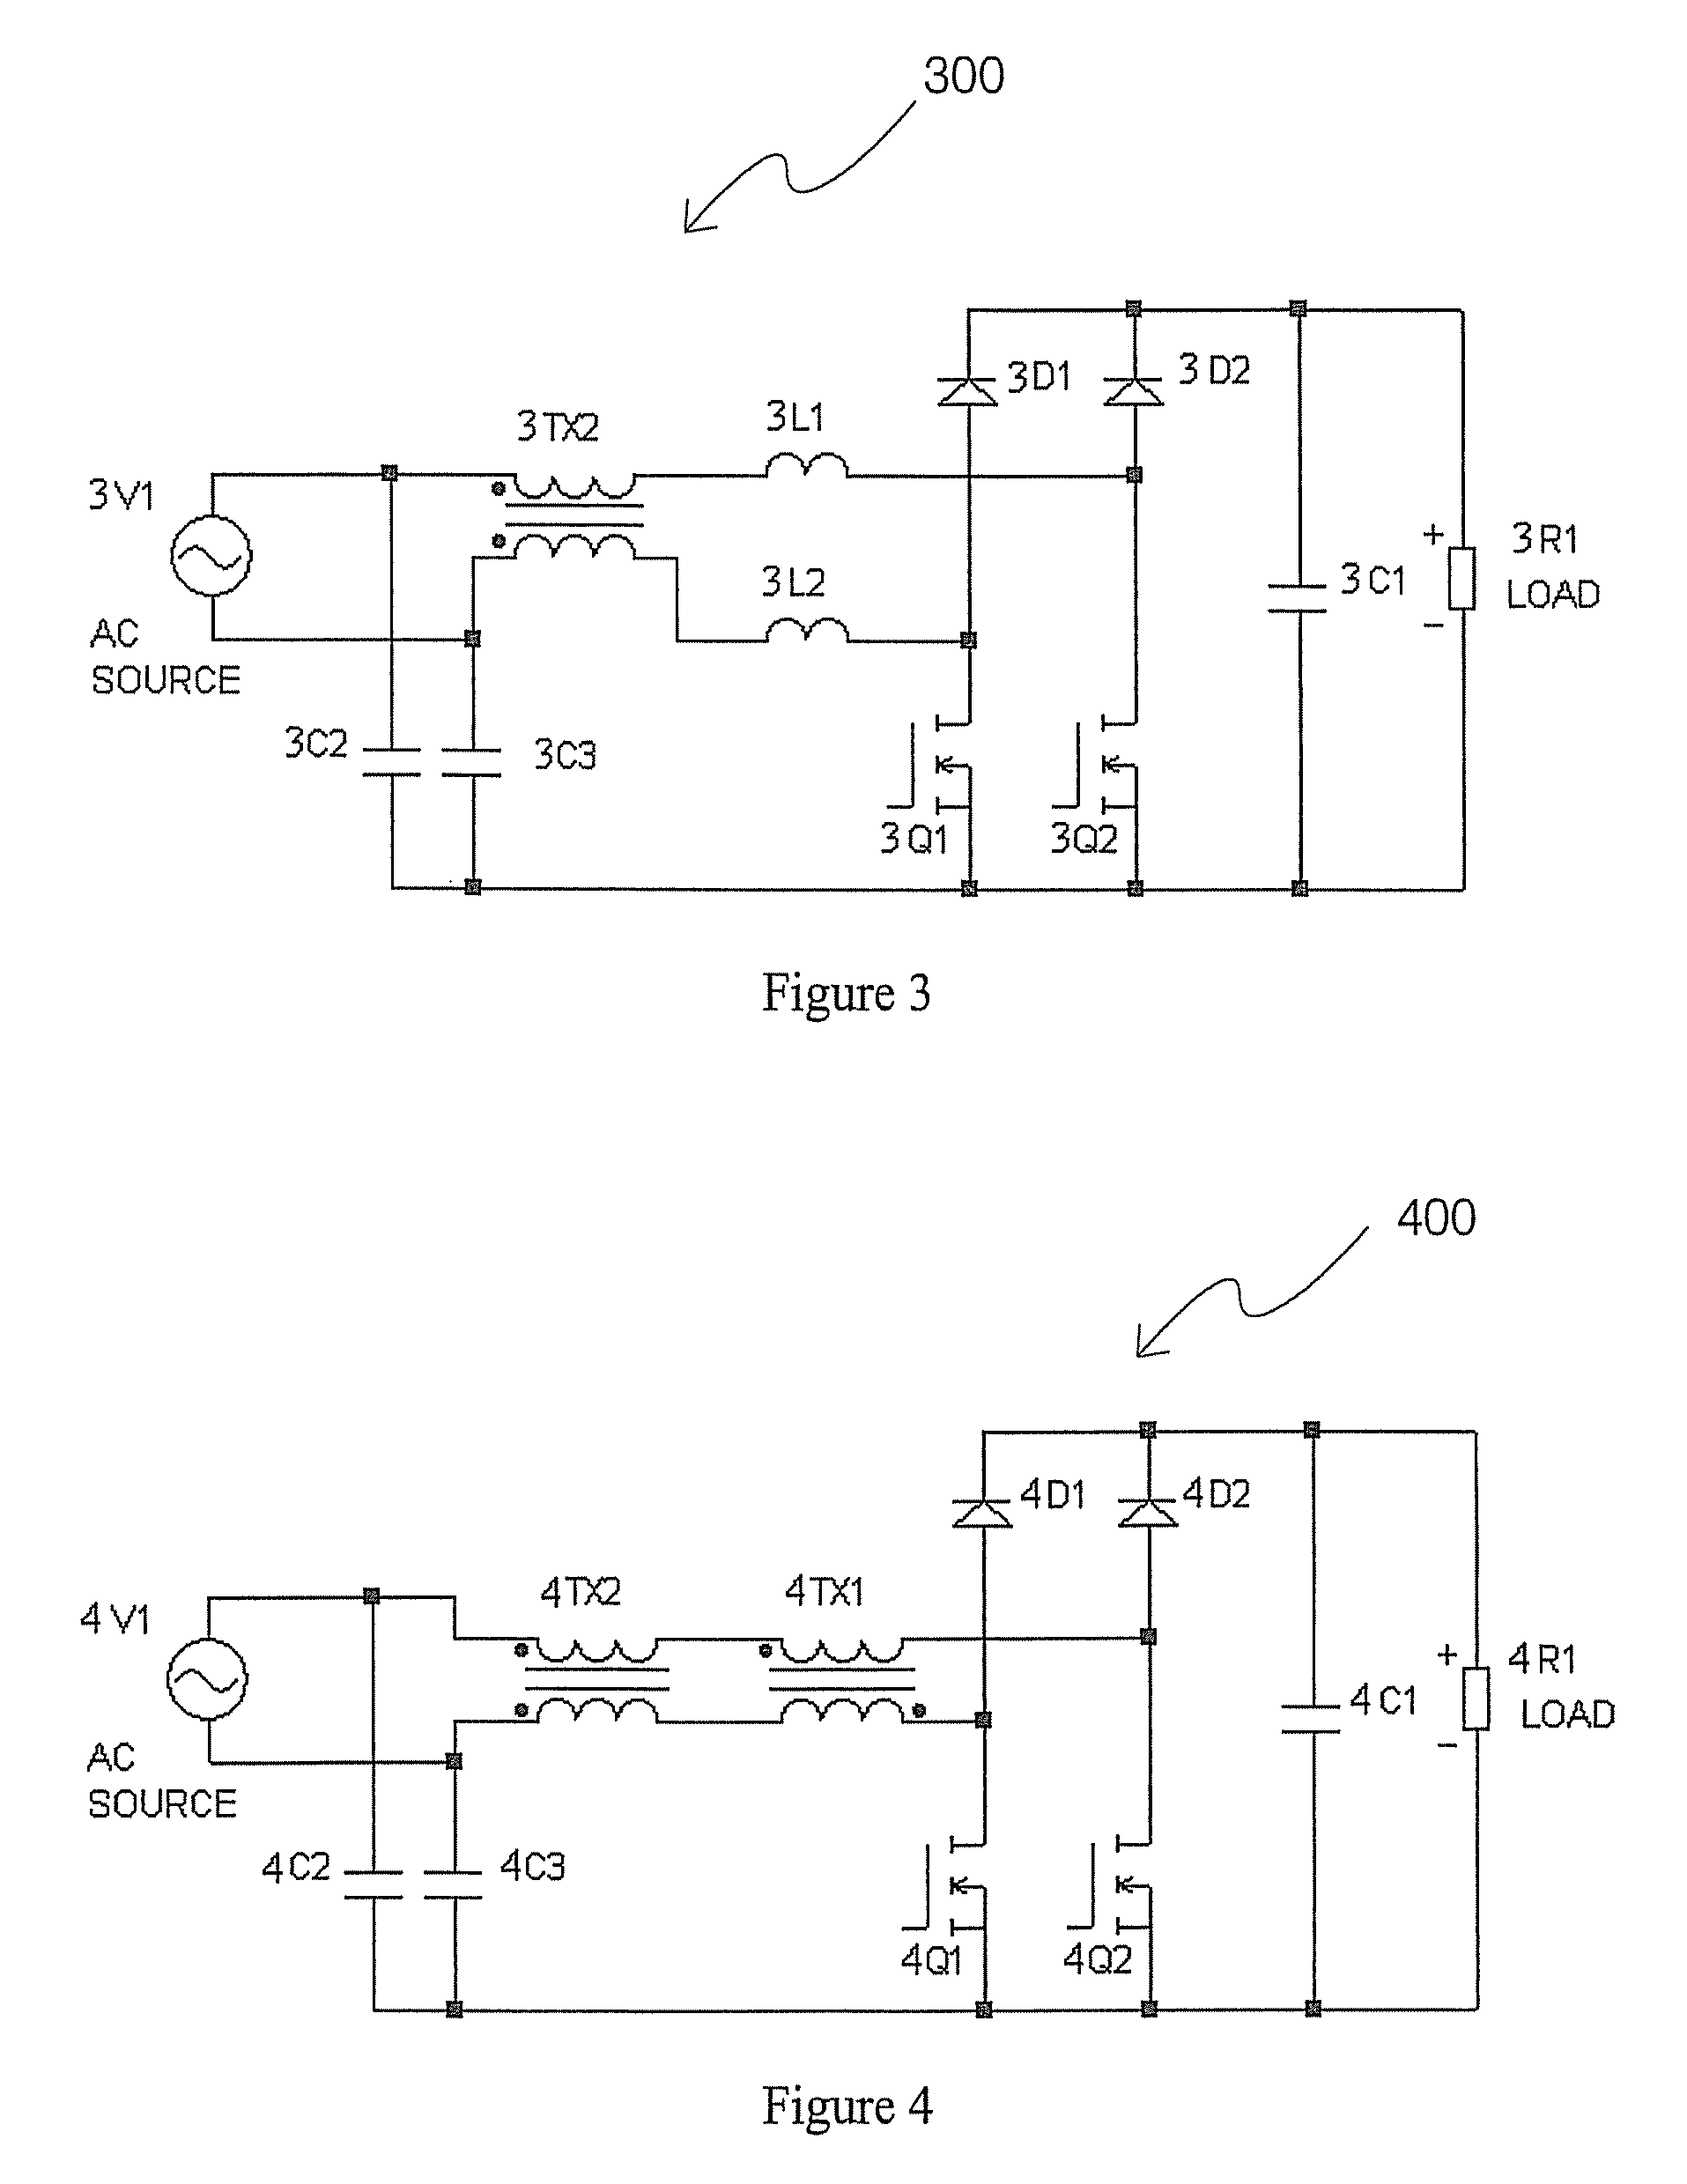 Bridgeless boost PFC circuits and systems with reduced common mode EMI